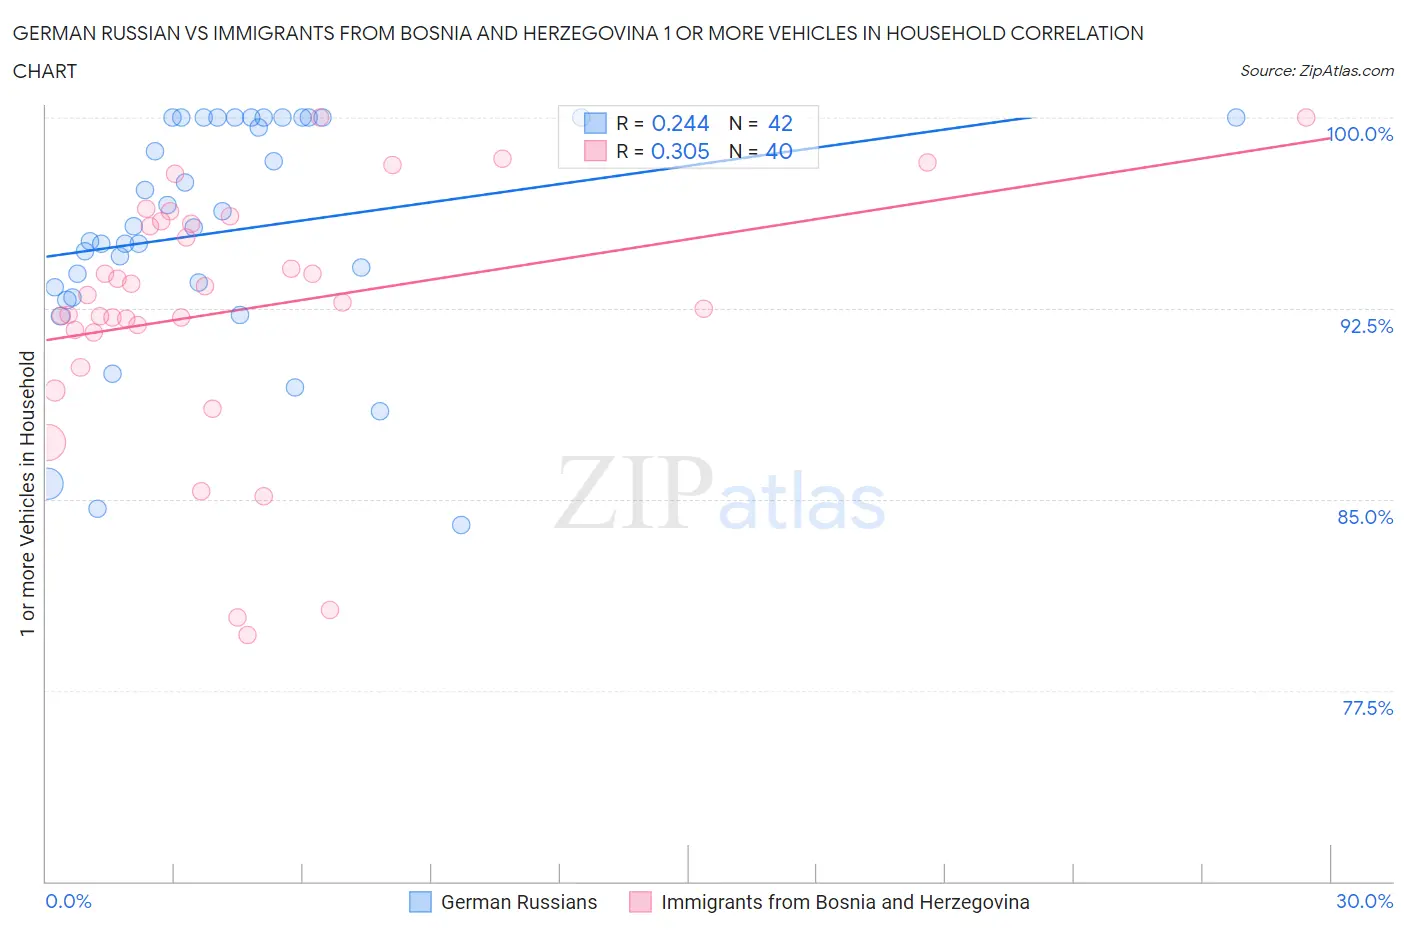 German Russian vs Immigrants from Bosnia and Herzegovina 1 or more Vehicles in Household